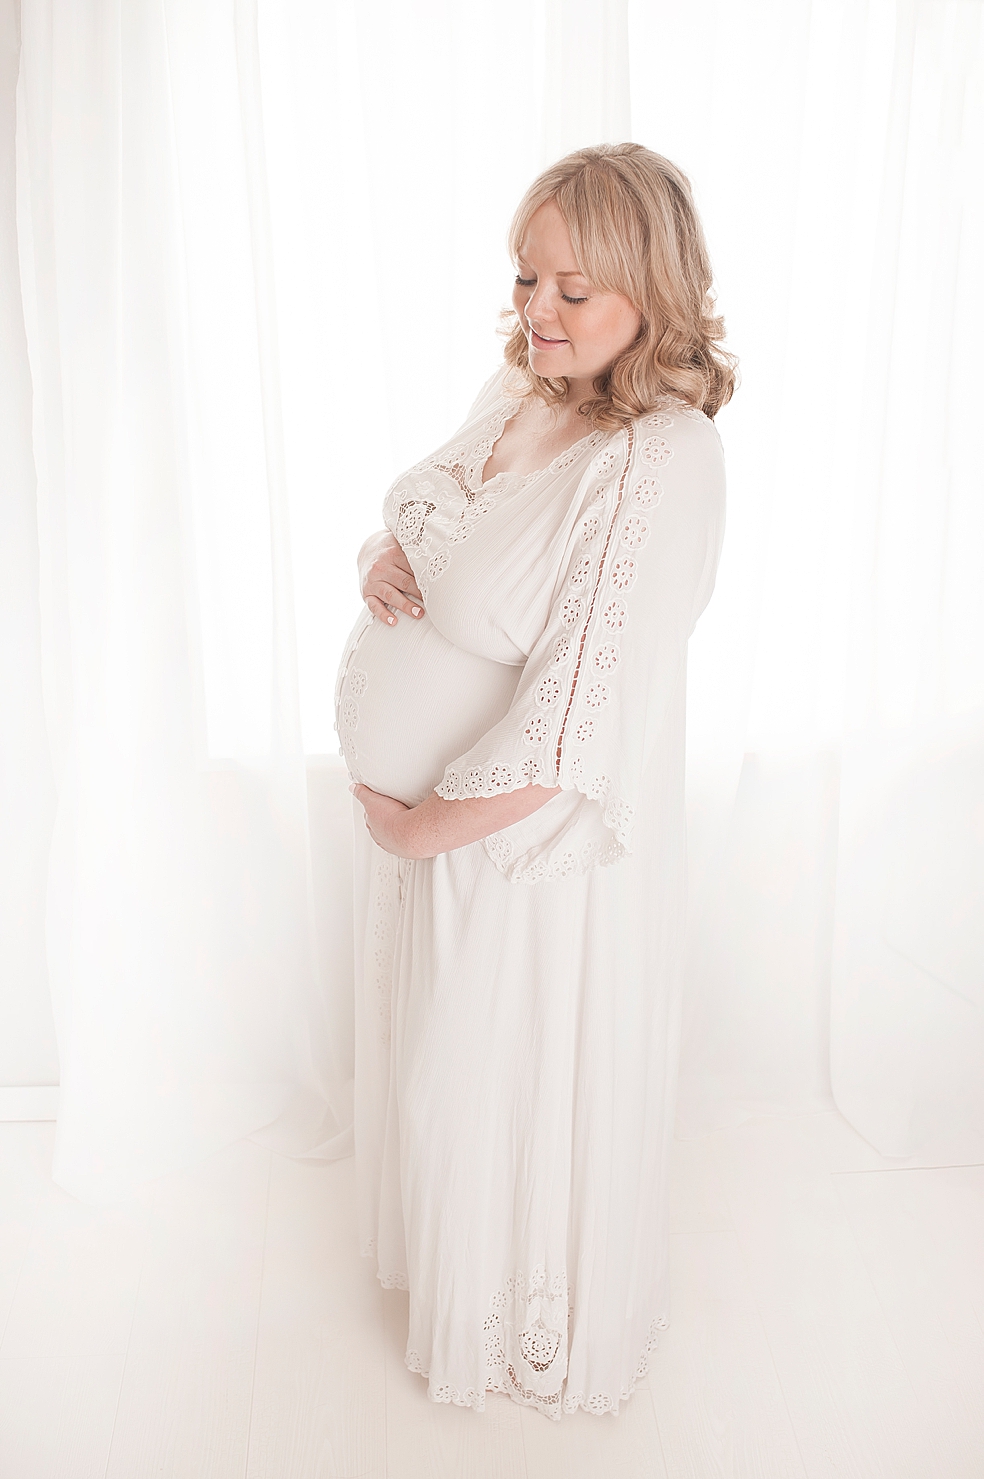 Mom to be in long white dress by a window with sheer drapes | Photo by Jessica Lee Photography